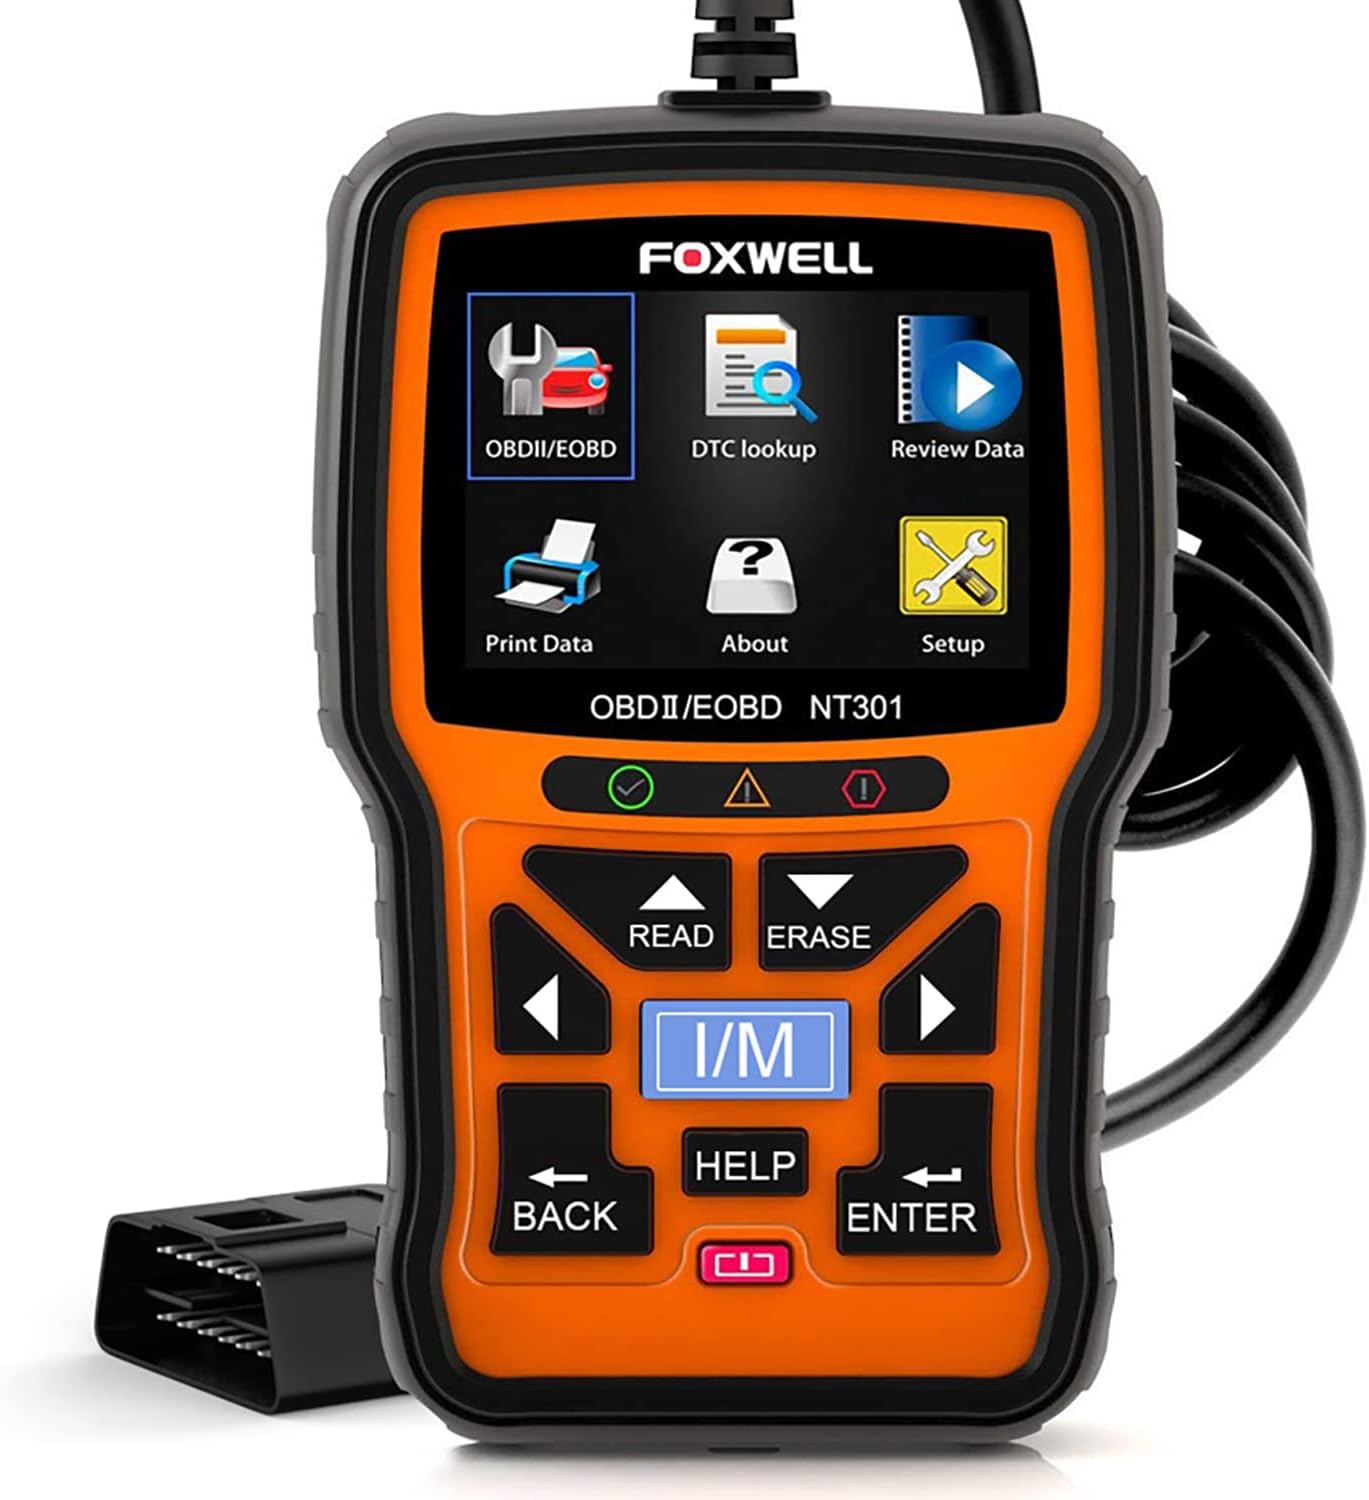 Hurry! Get the FOXWELL NT301 OBD2 Scanner Now at a Special Discounted Price!